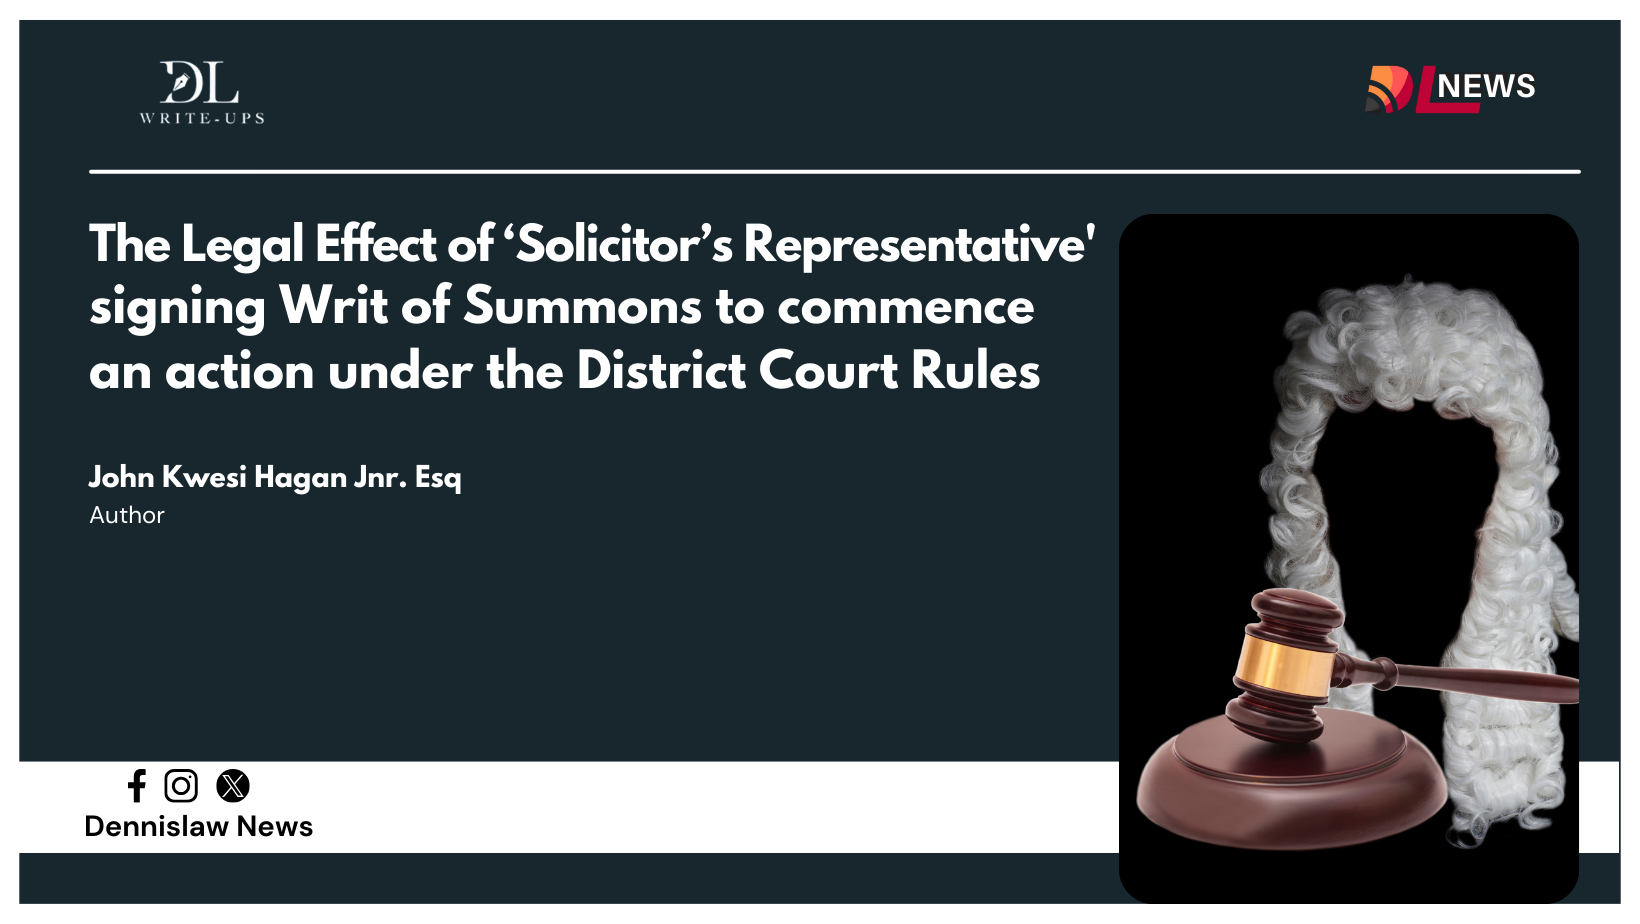 The Legal Effect of ‘Solicitor’s Representative' signing Writ of Summons to commence an action under the District Court Rules